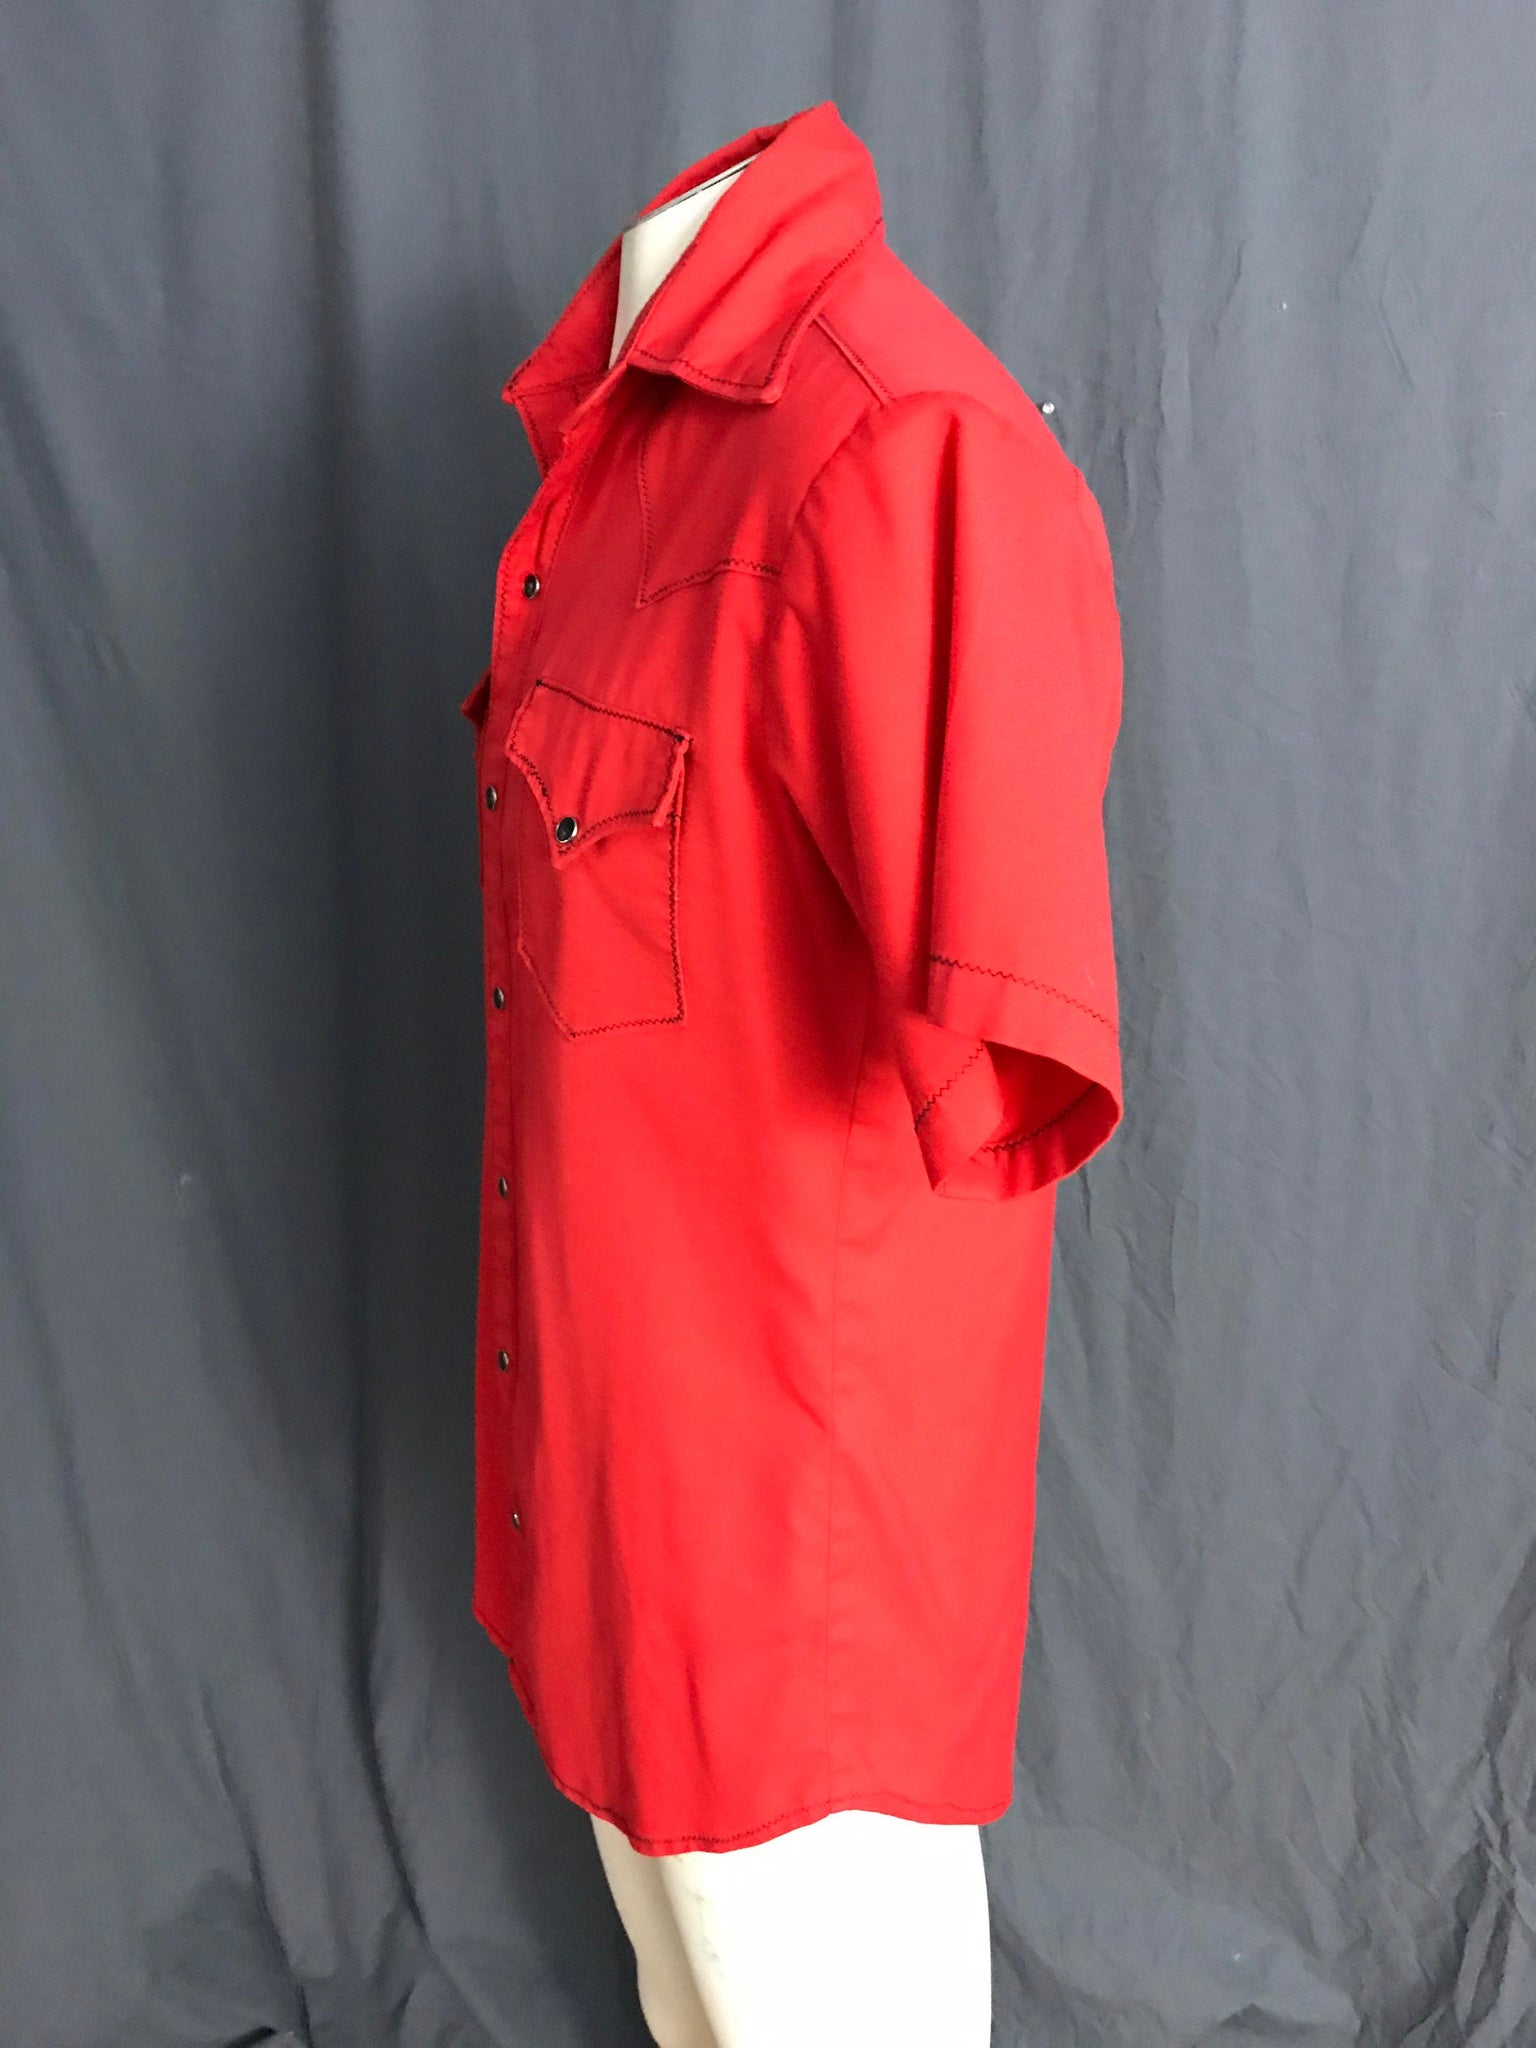 Vintage red and black 1970’s cowboy western shirt M